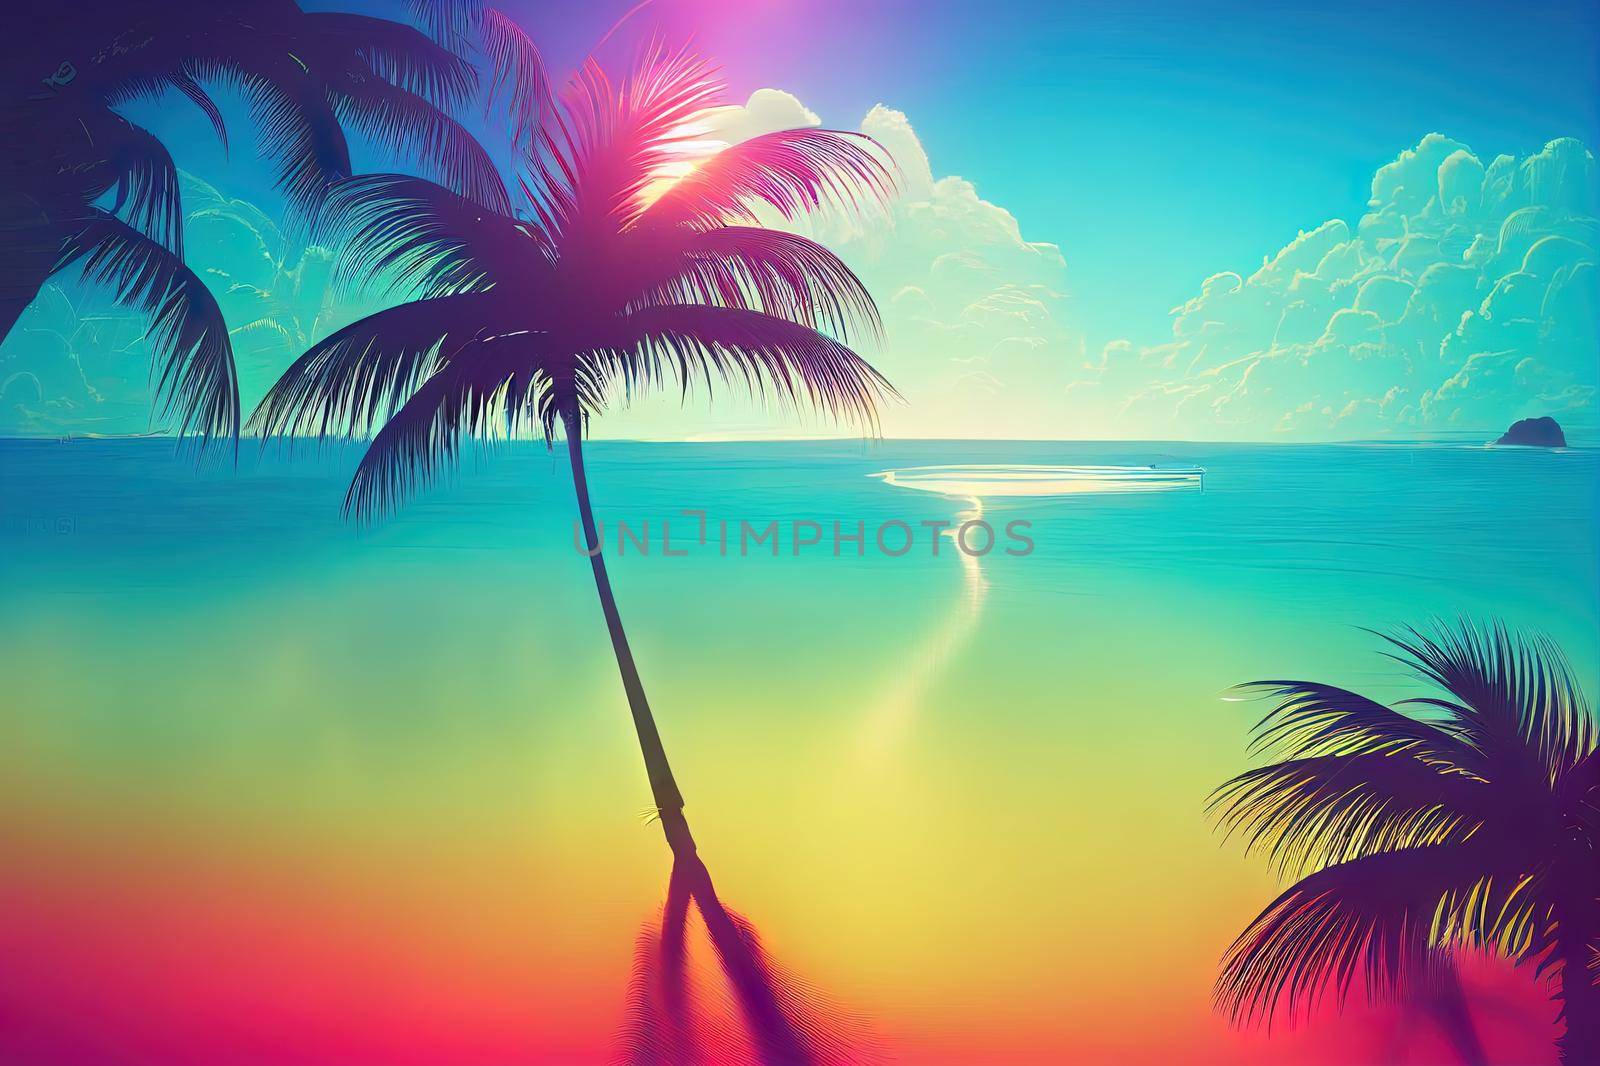 Abstract futuristic fantasy sea landscape with neon circle with center. Island with palm trees on the beach. Sunlight, daytime view. Reflection in water, clouds. 3D illustration.